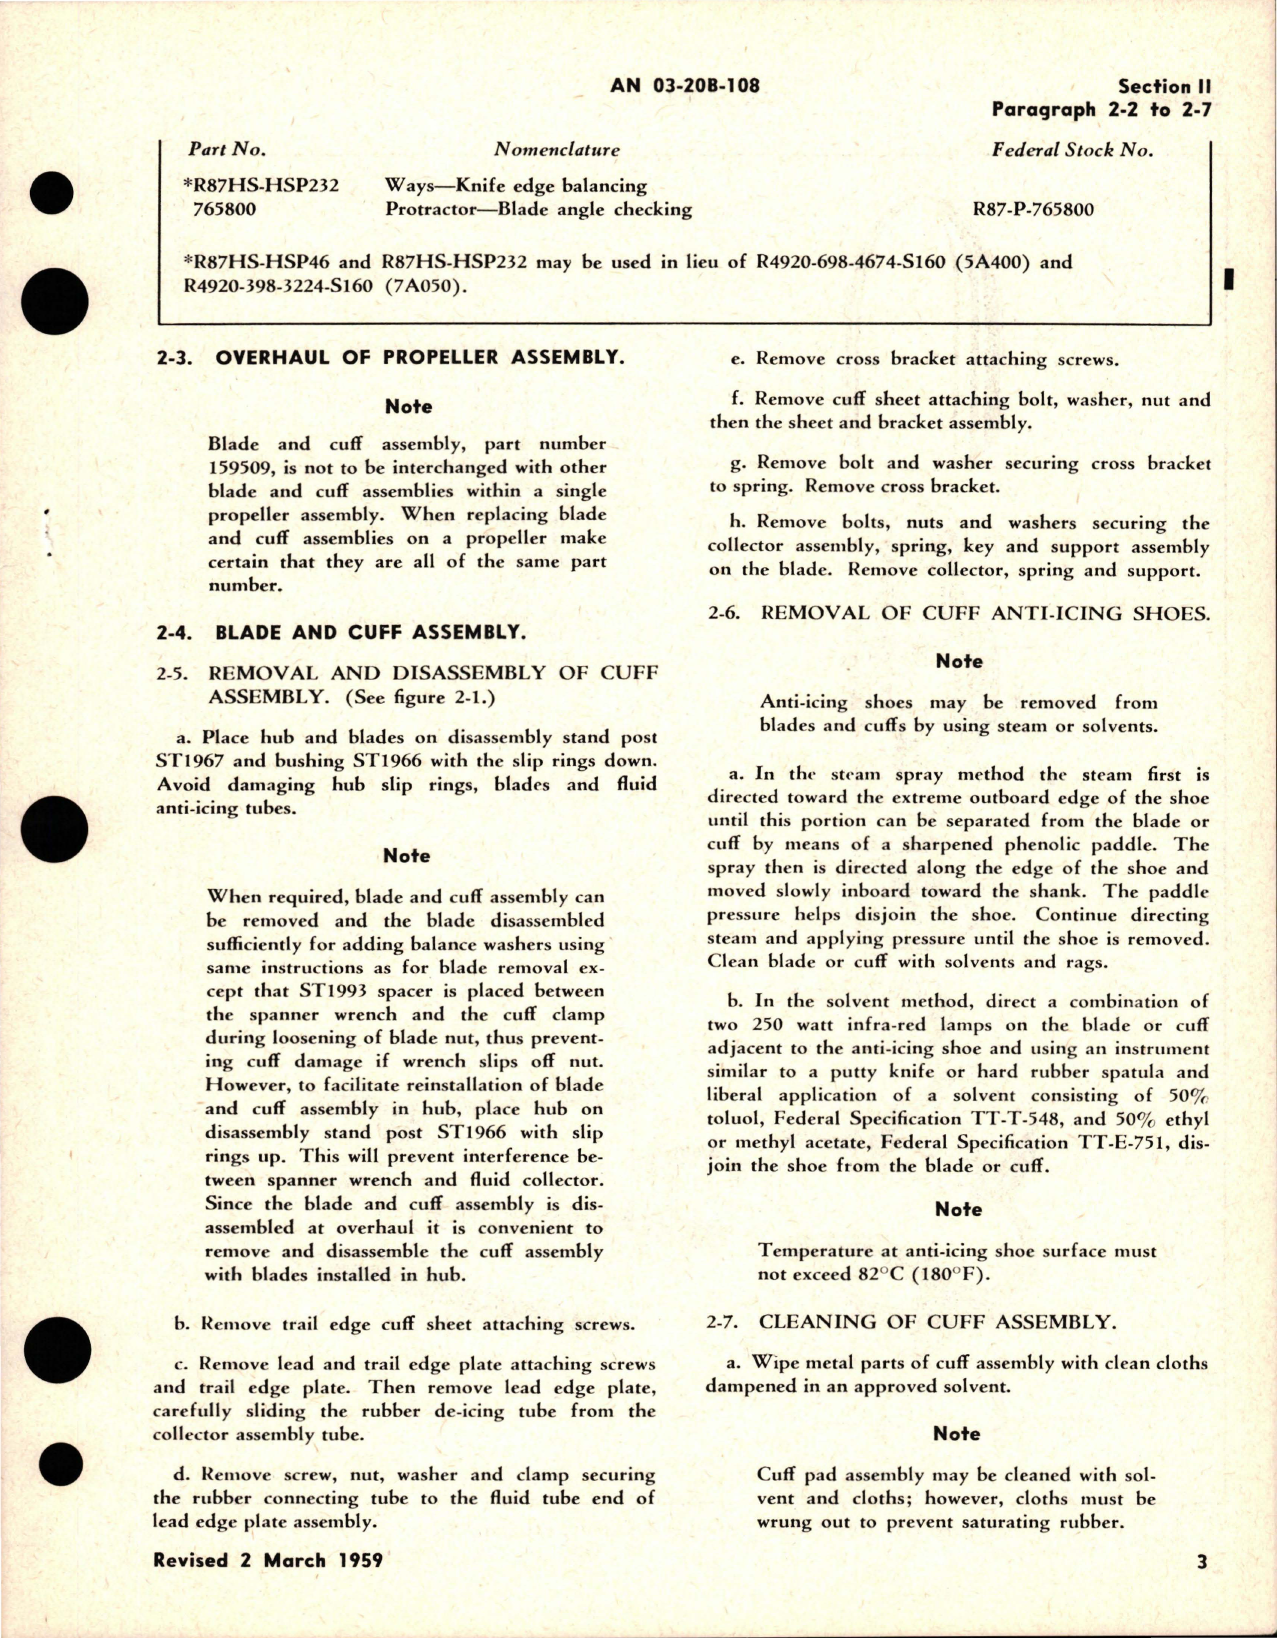 Sample page 5 from AirCorps Library document: Overhaul Instructions for Pitch Lever Type Electric Propeller - Models C432S-C22, C432S-C24, C432S-C26, and C432S-C2